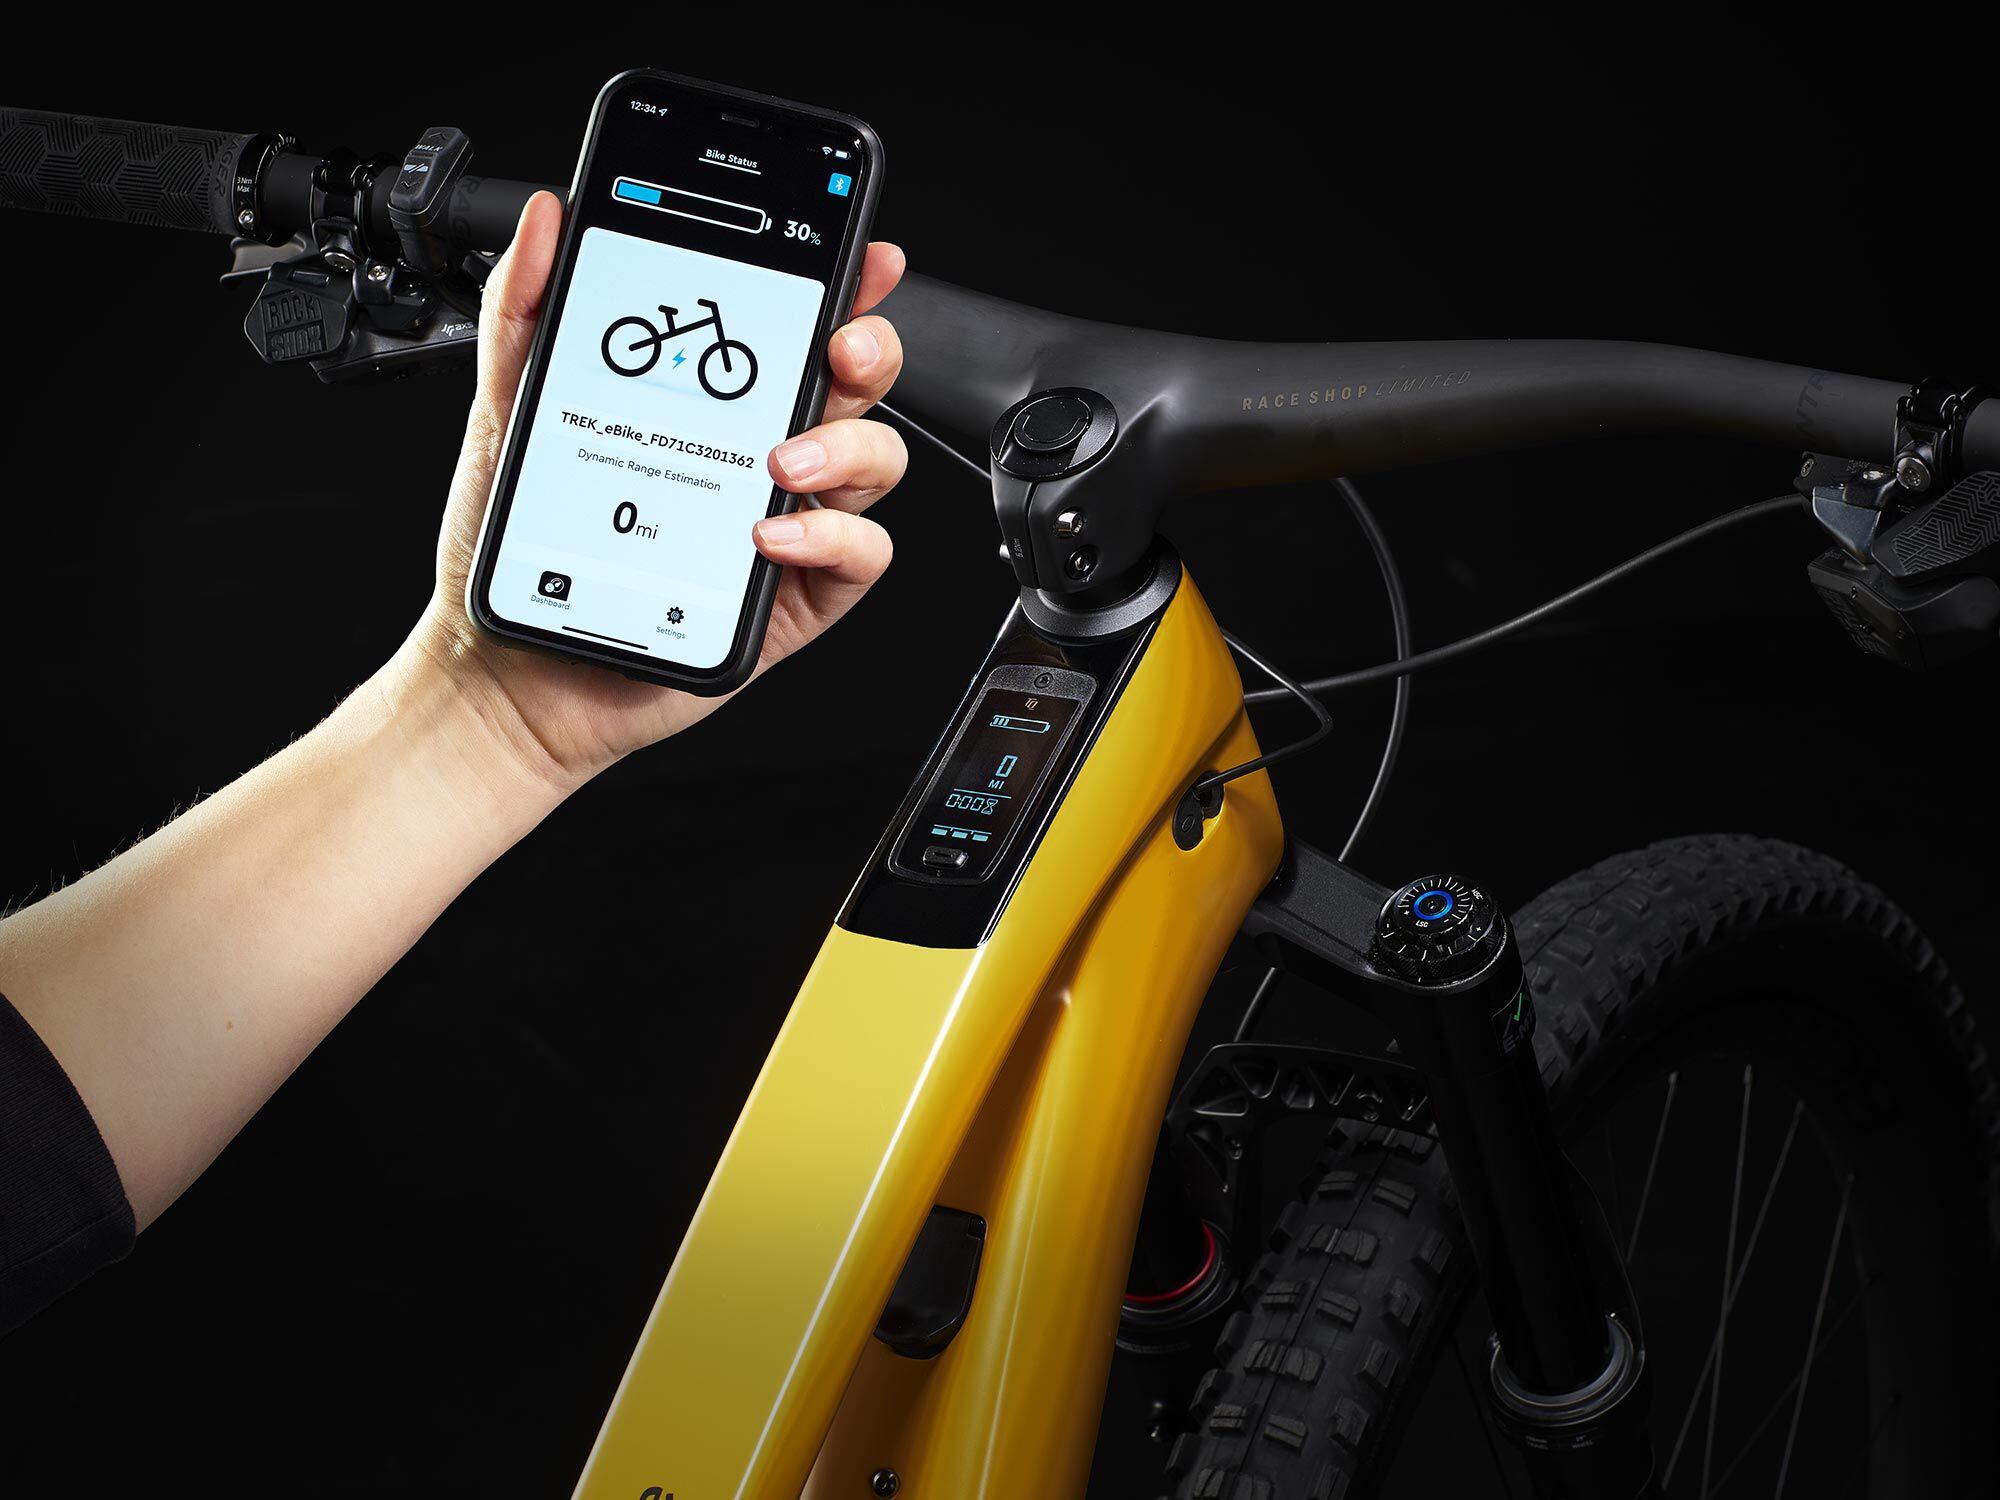 Riders can also get ride data from the Trek Central app.